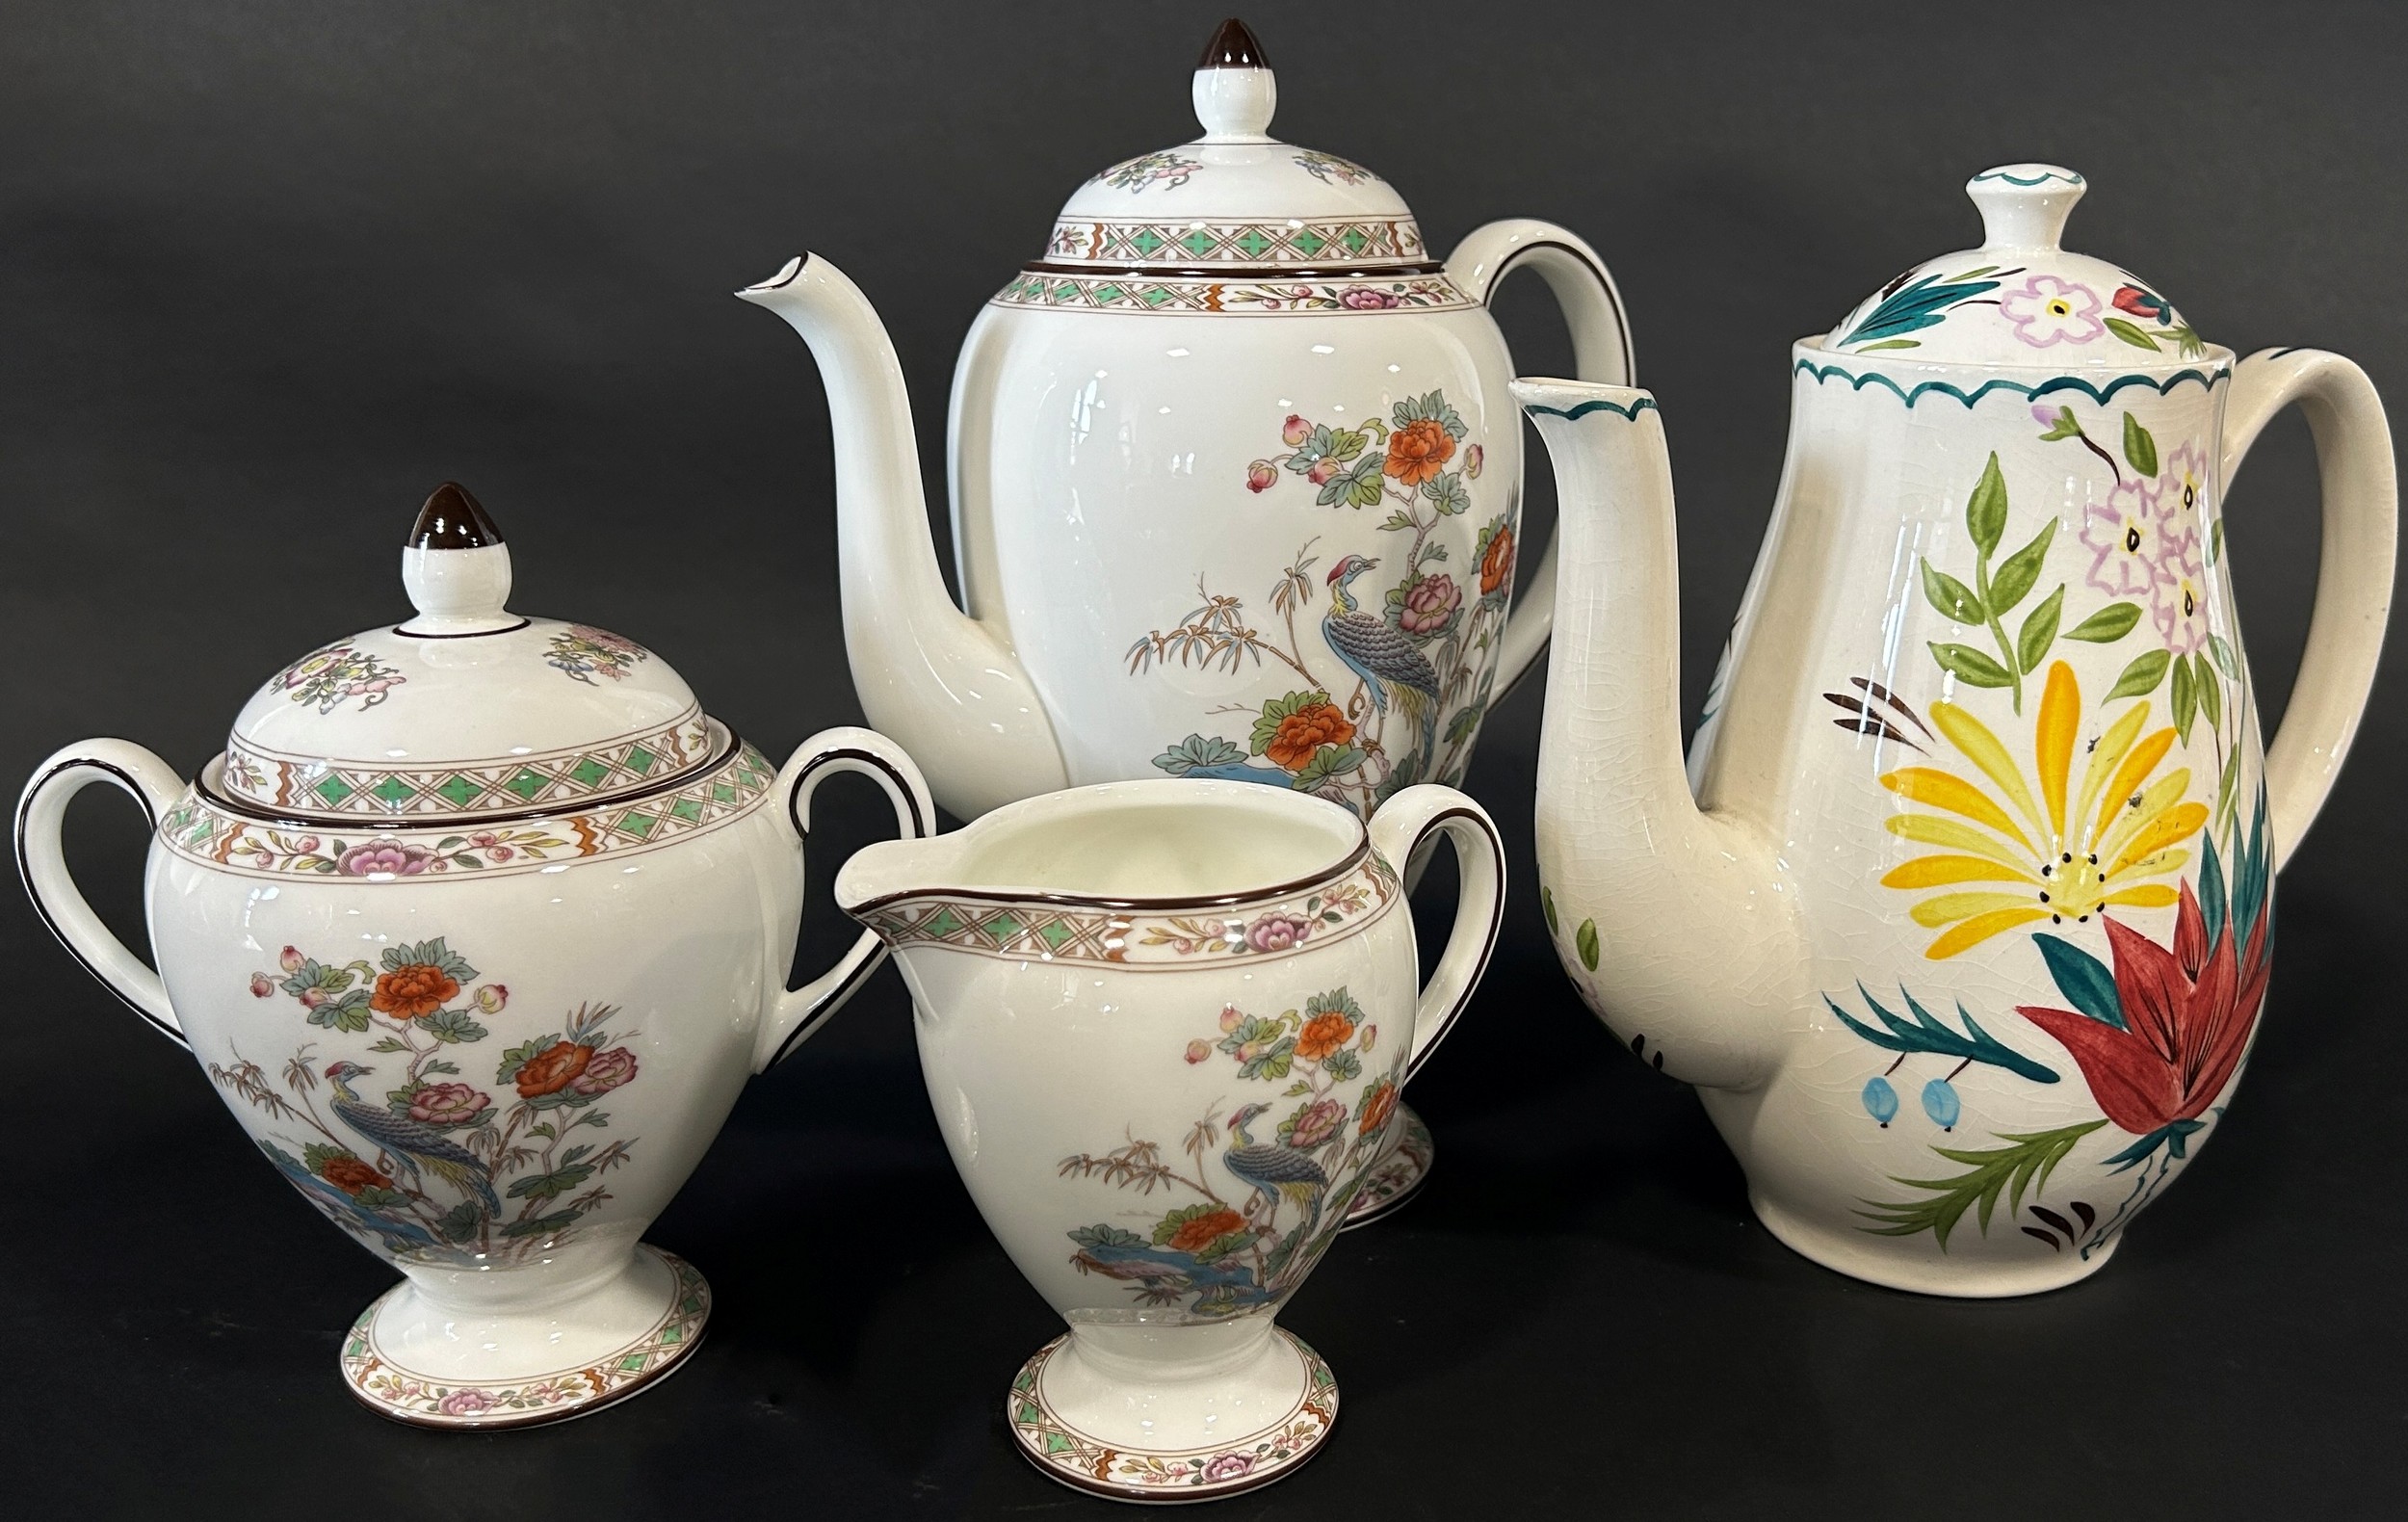 A collection of Shelley blue daisy pattern teaware, a Wedgwood Kutani Crane coffee pot and sucrier - Image 2 of 2